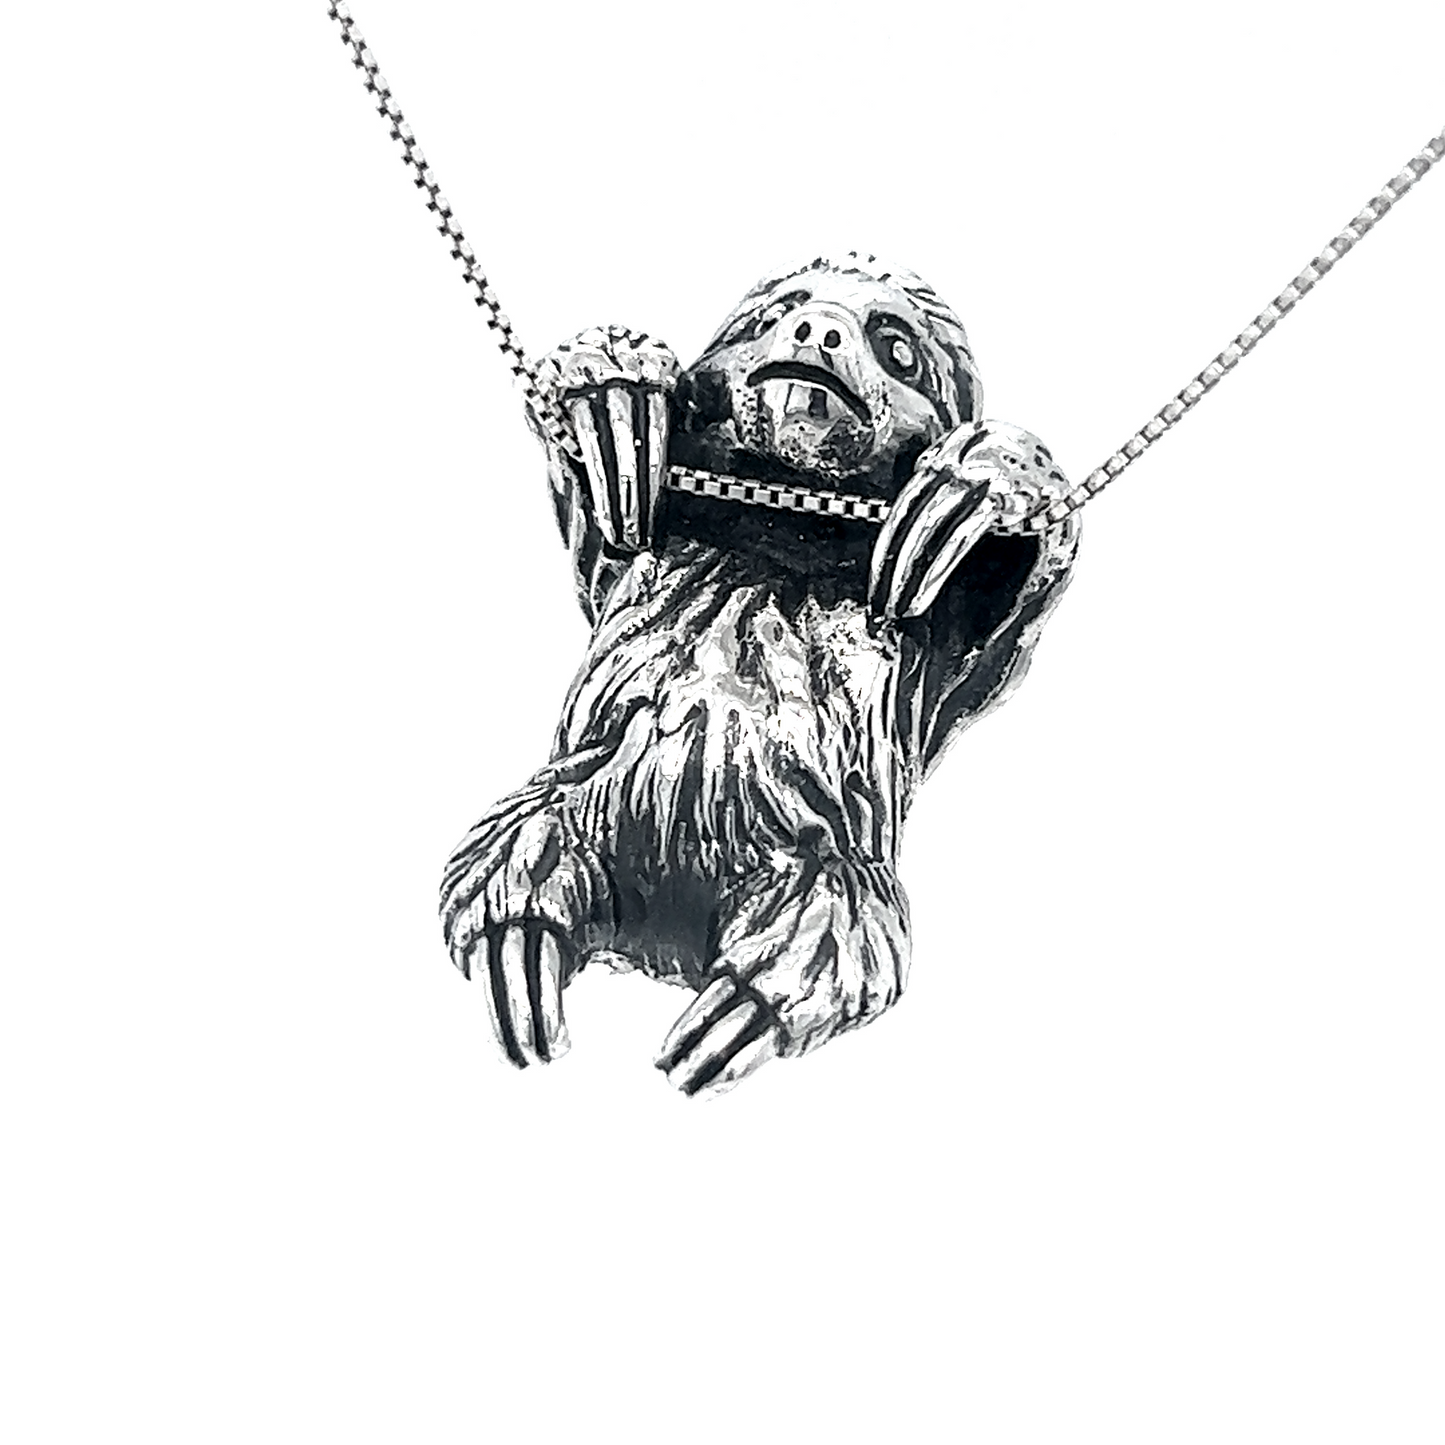 A Super Silver Sloth Pendant hanging on a white background.